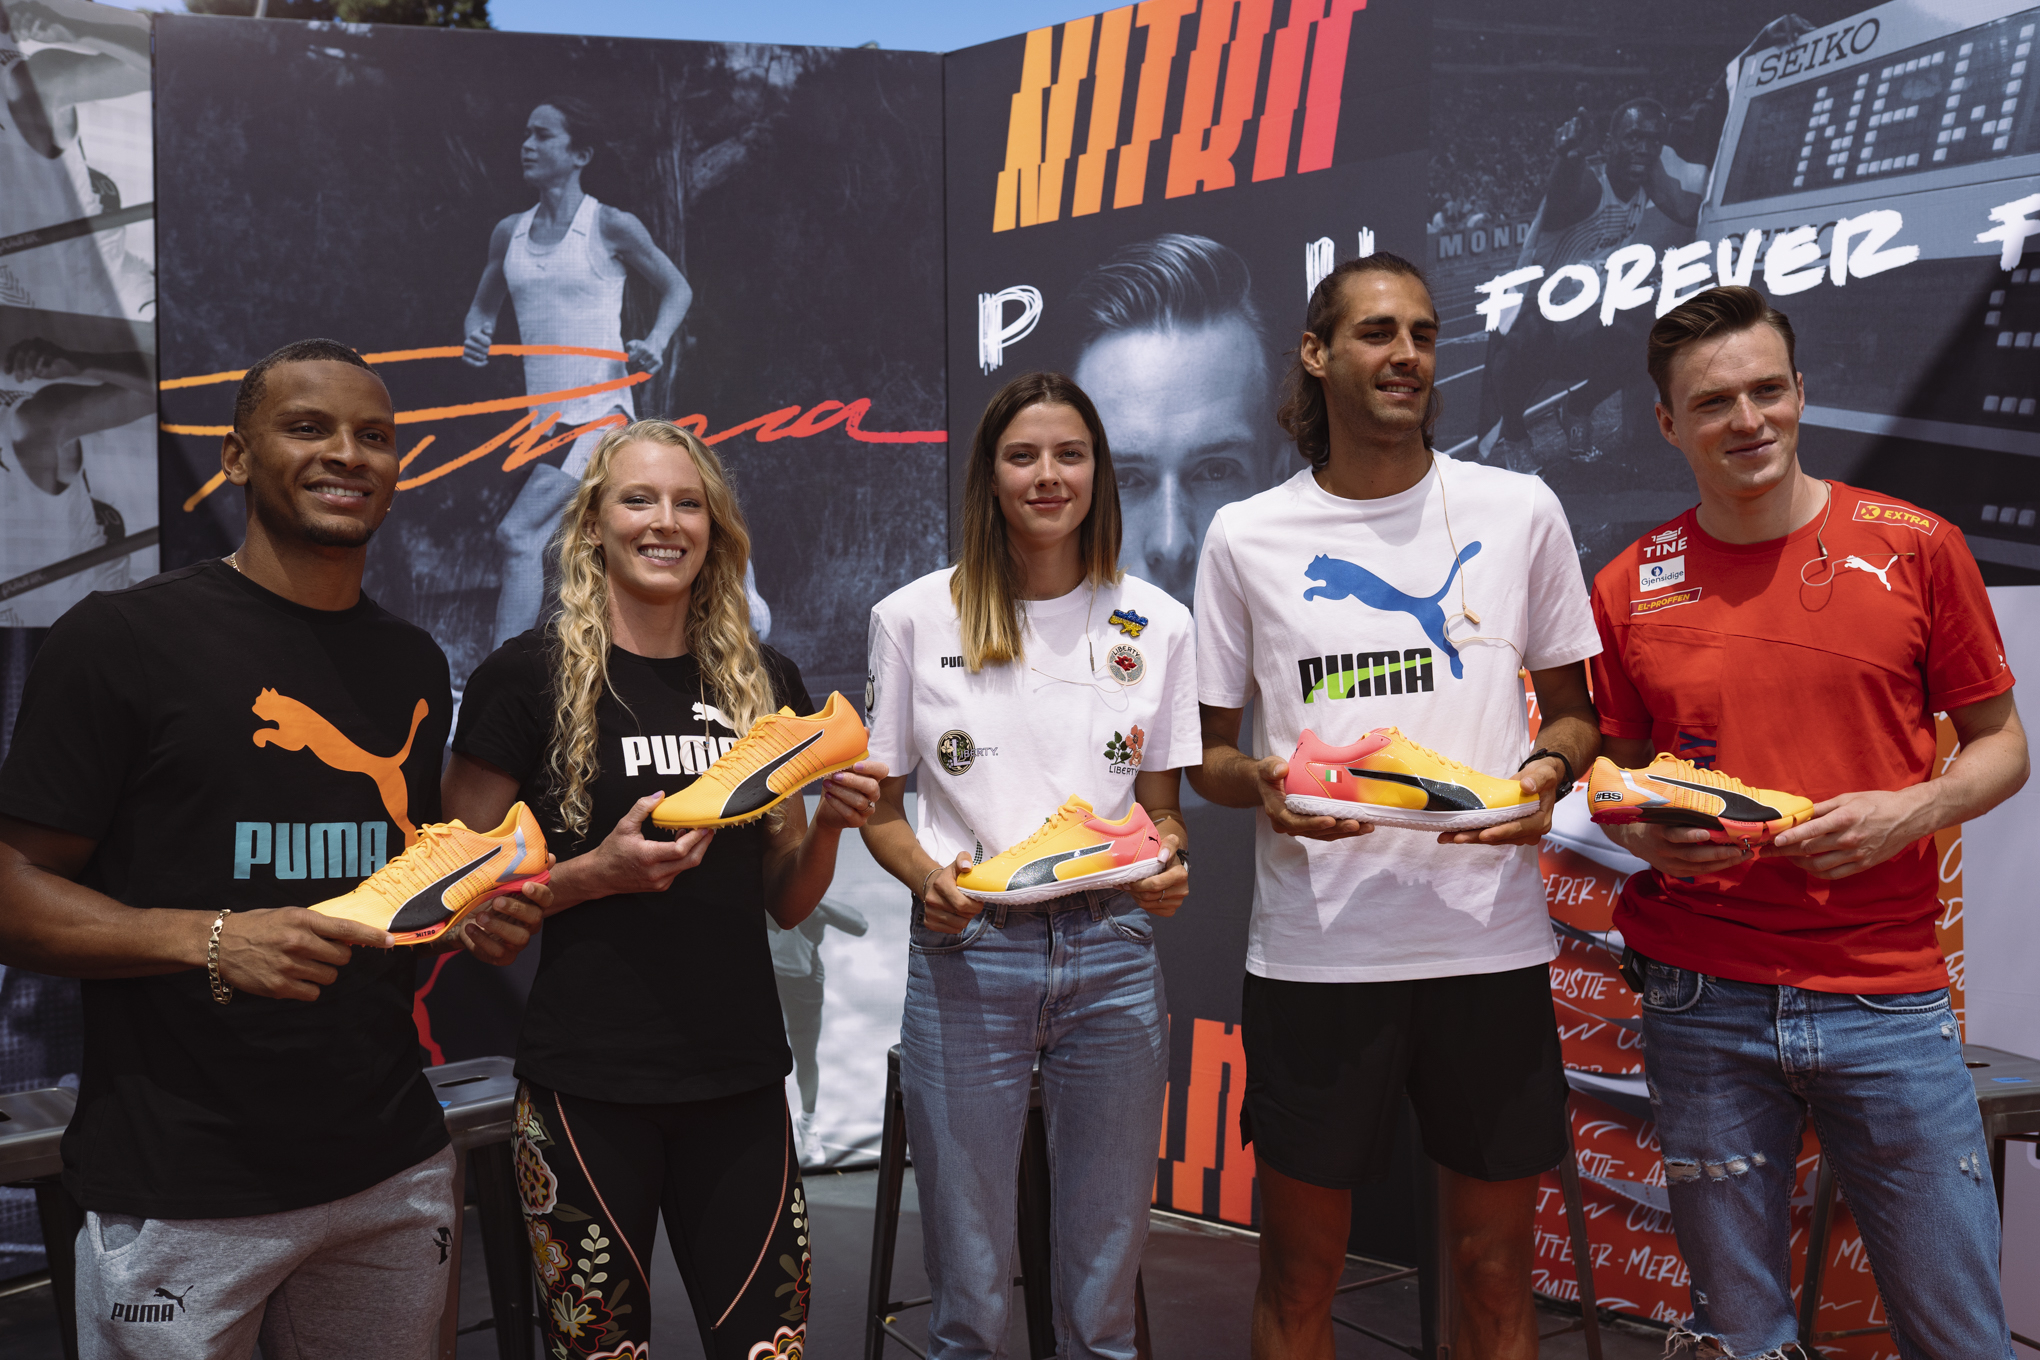 PUMA Takes its “Forever Faster” Spirit to the World Athletics